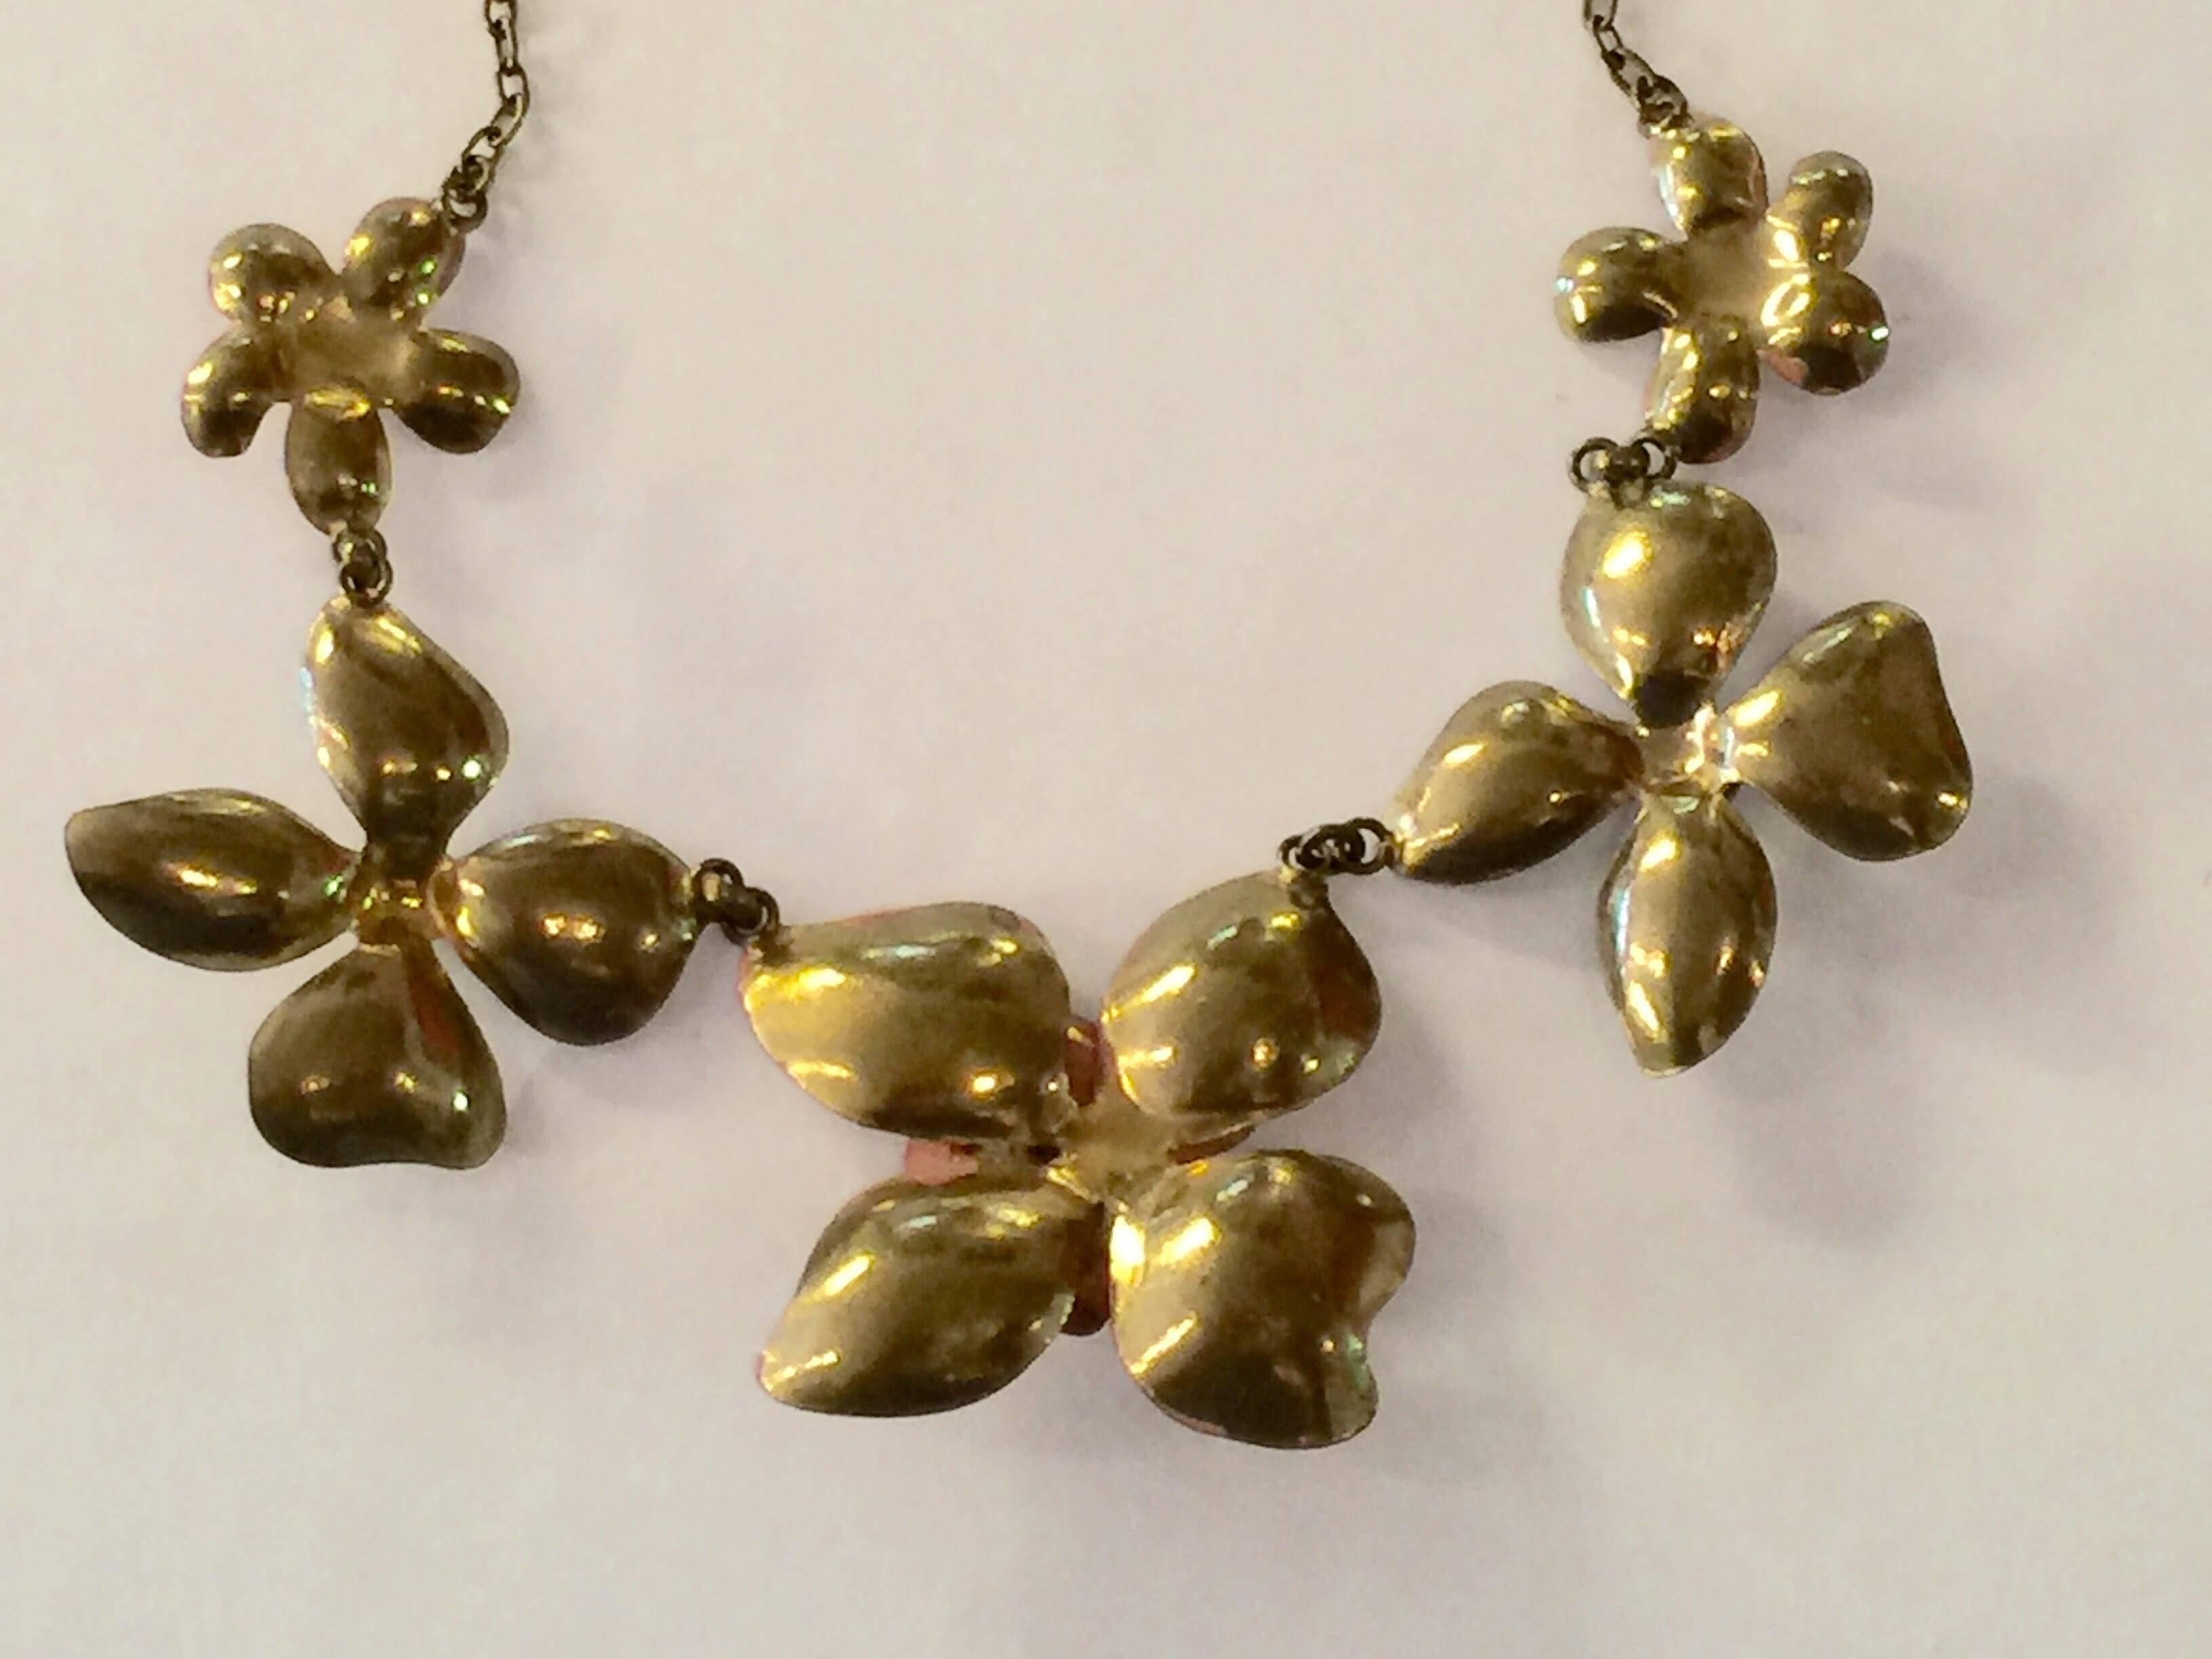 Enamelled Goldtone Floral Modernist Necklace, 1940s   In Excellent Condition For Sale In Palm Springs, CA